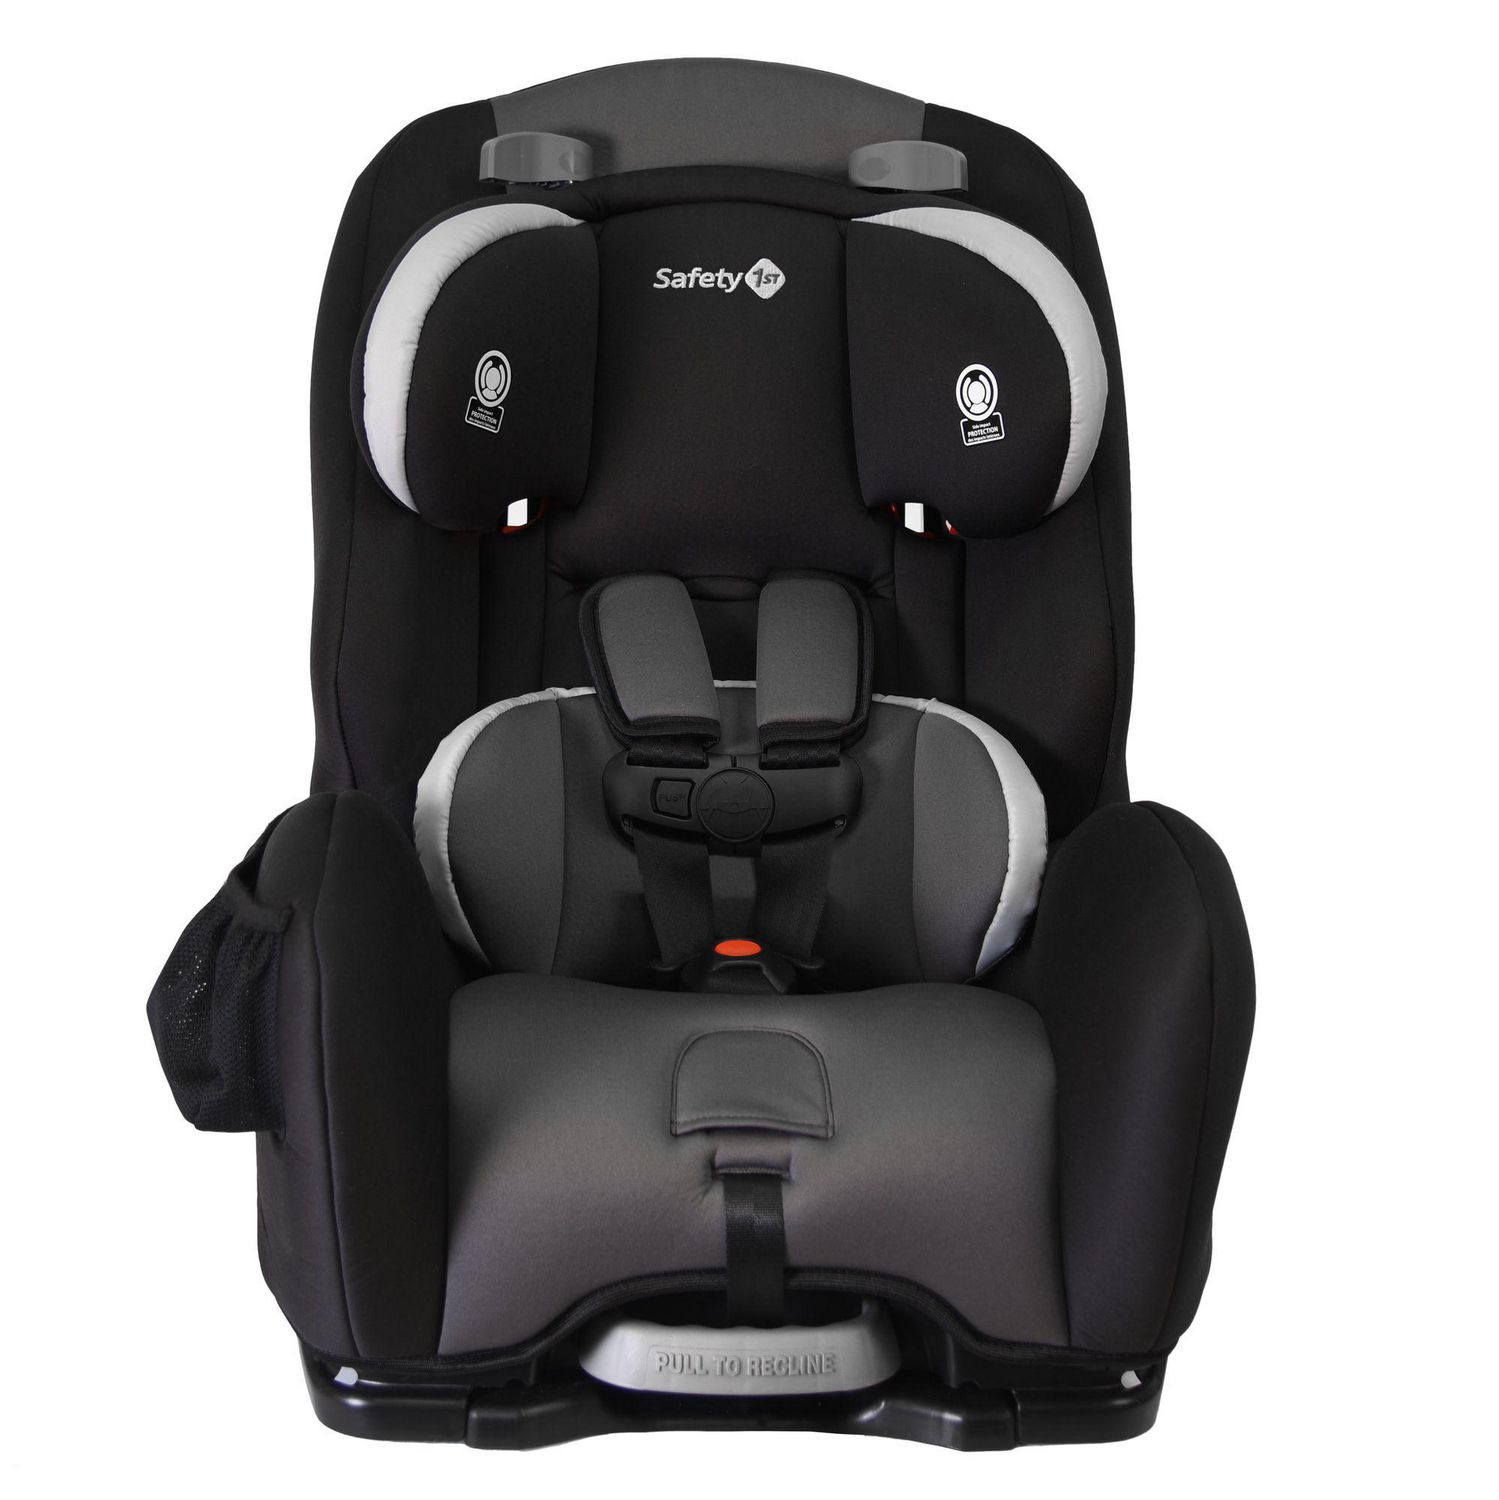 Safety 1st Navi 3-in-1 Car Seat, Fits baby 5-80 pounds